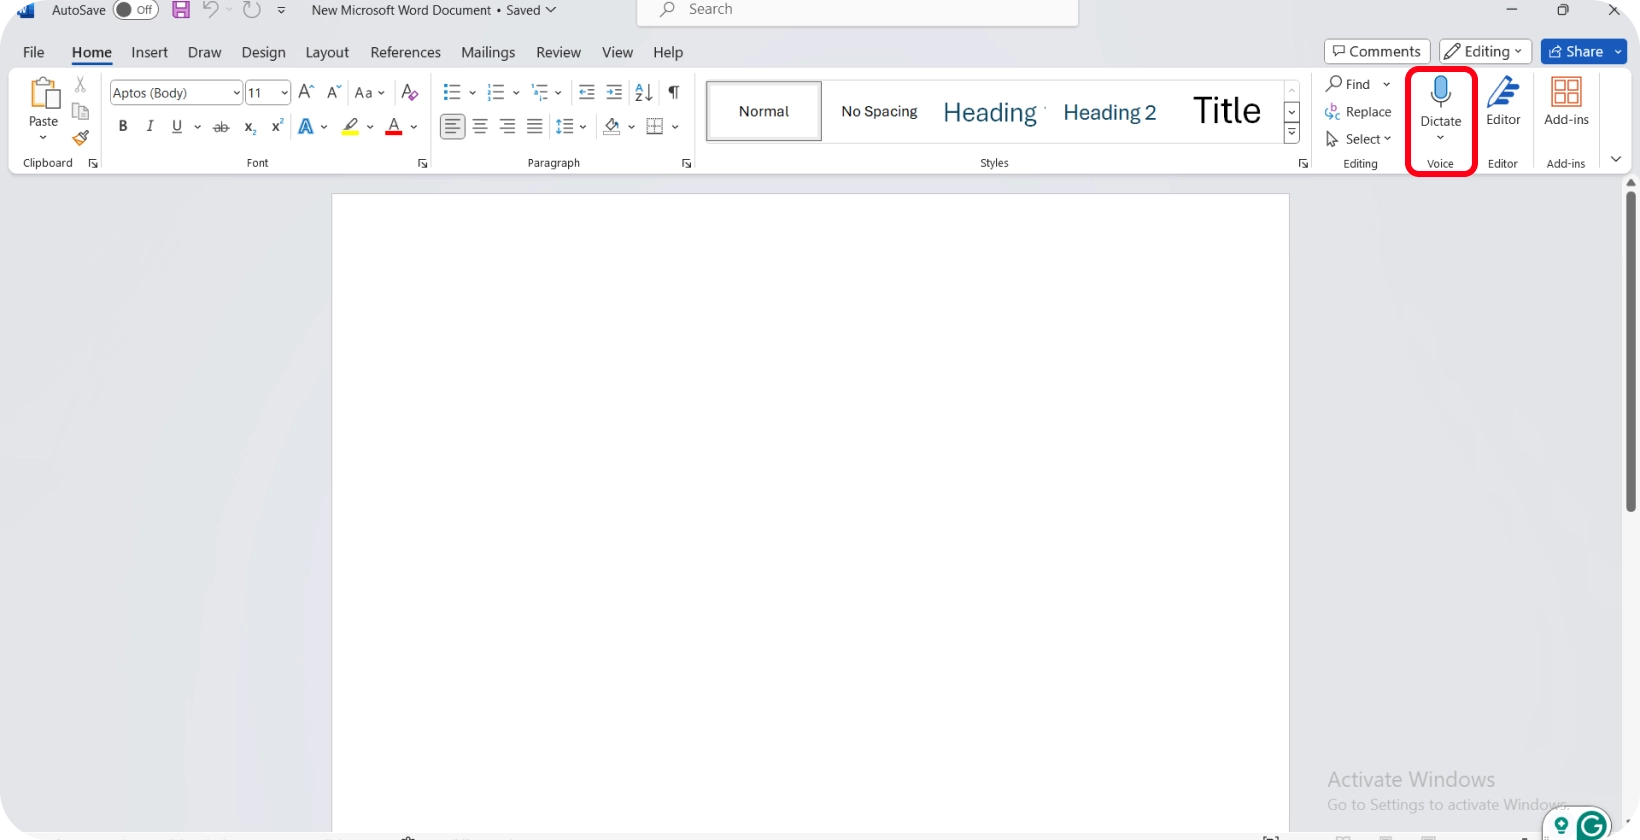 Microsoft Word interface with the dictate feature highlighted, ready for voice-to-text transcription.